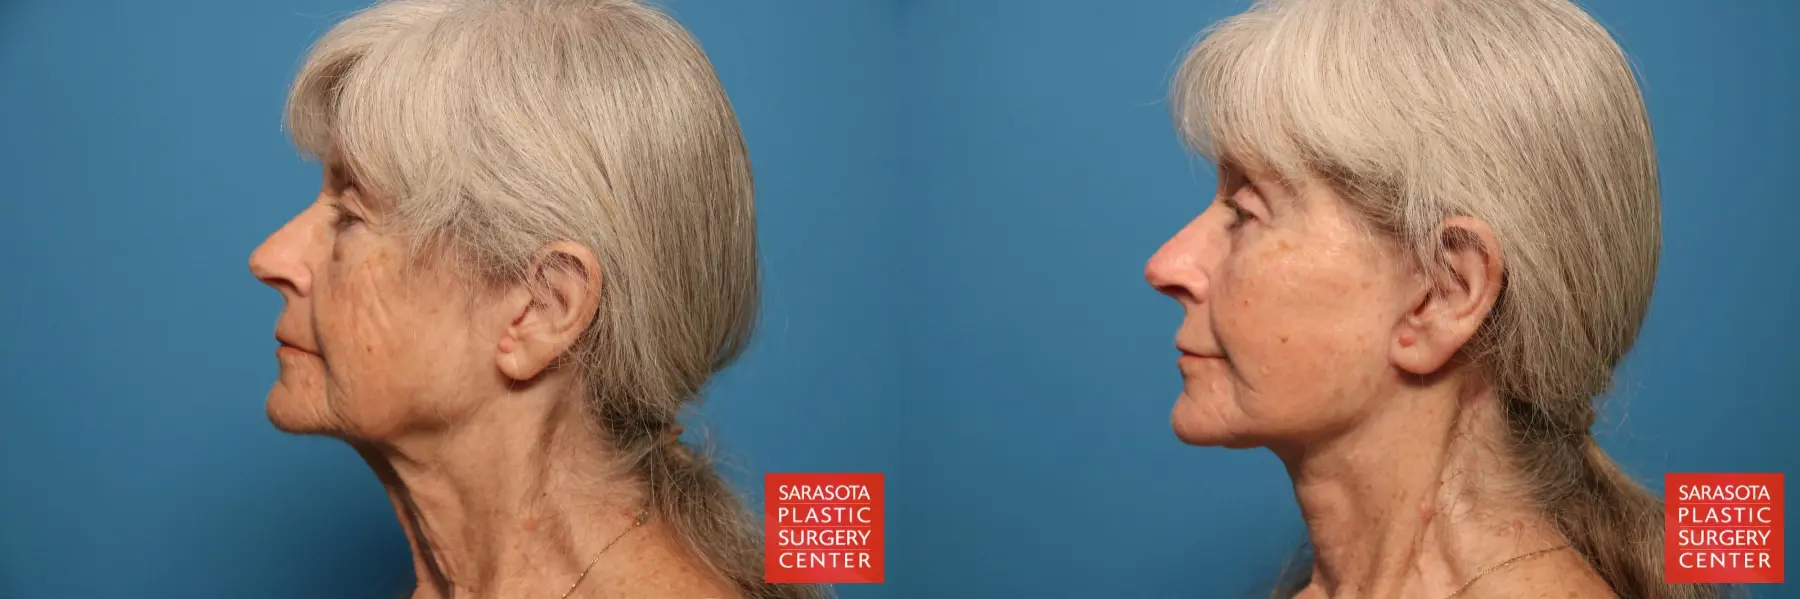 Facelift Revision: Patient 1 - Before and After 3